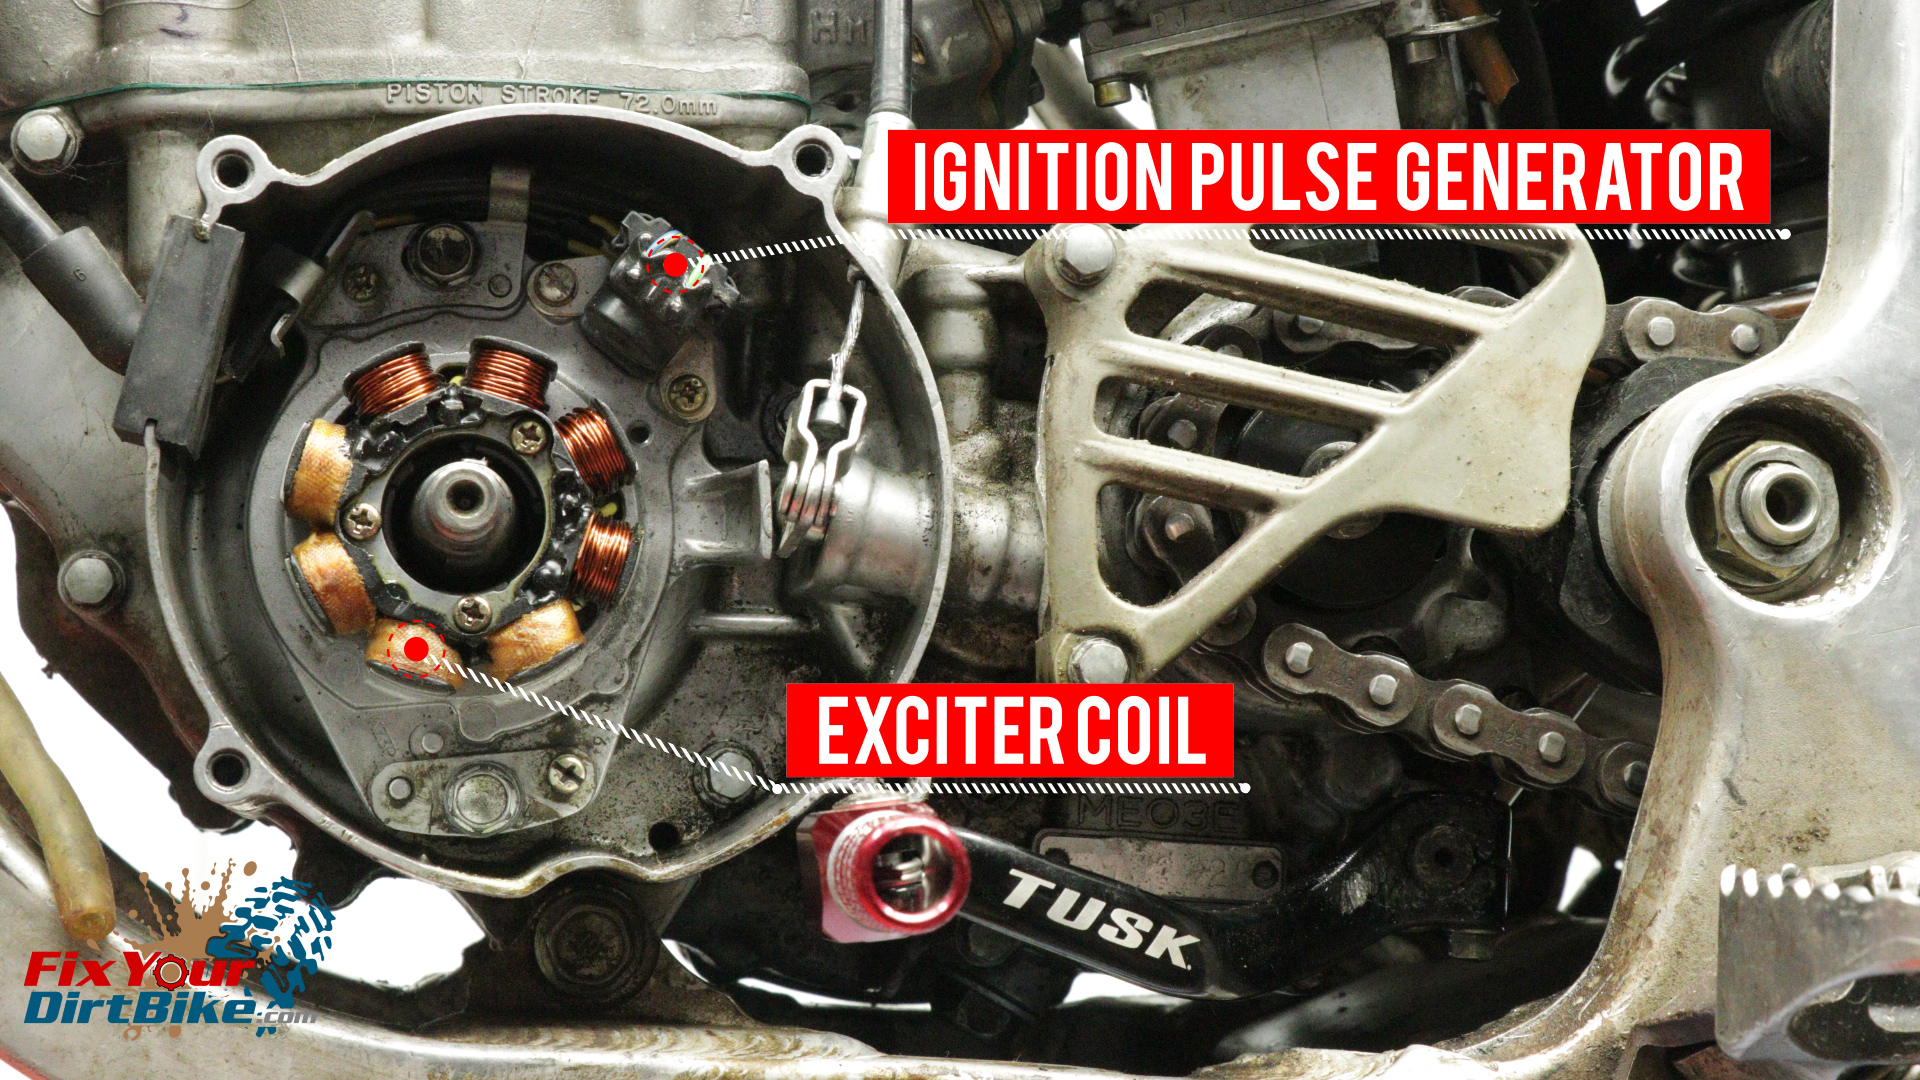 The Ignition Pulse Generator And Exciter Coil Are Part Of The Stator